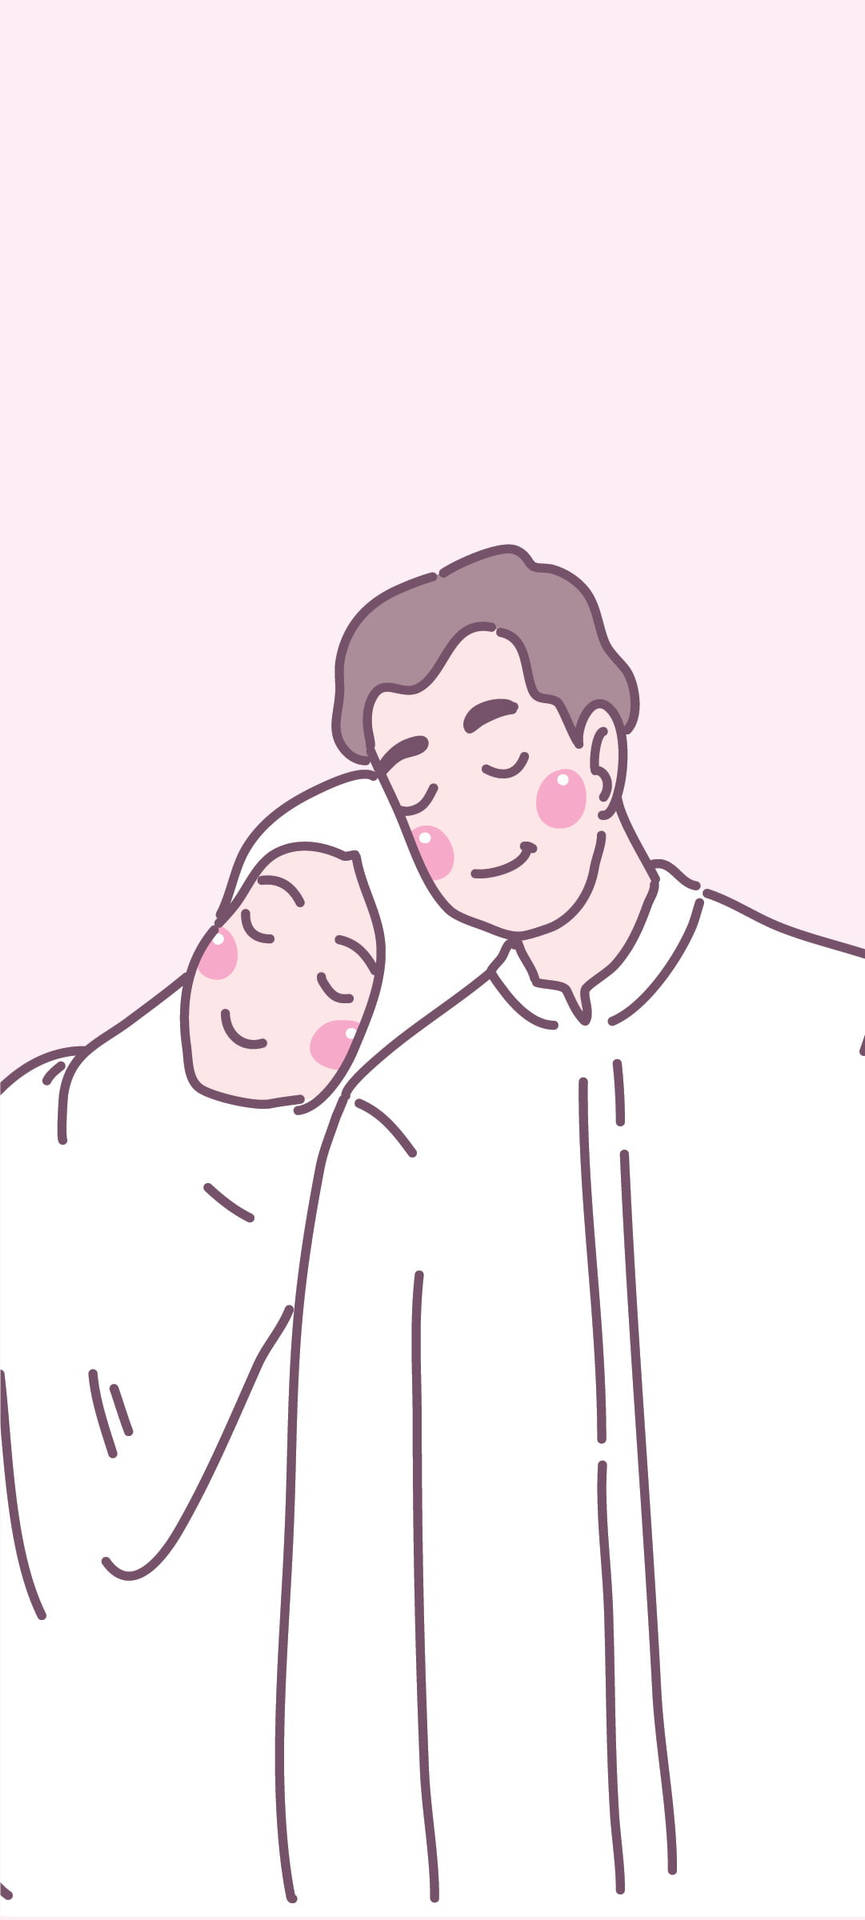 Muslim Couple Cartoon Pink And White Aesthetic